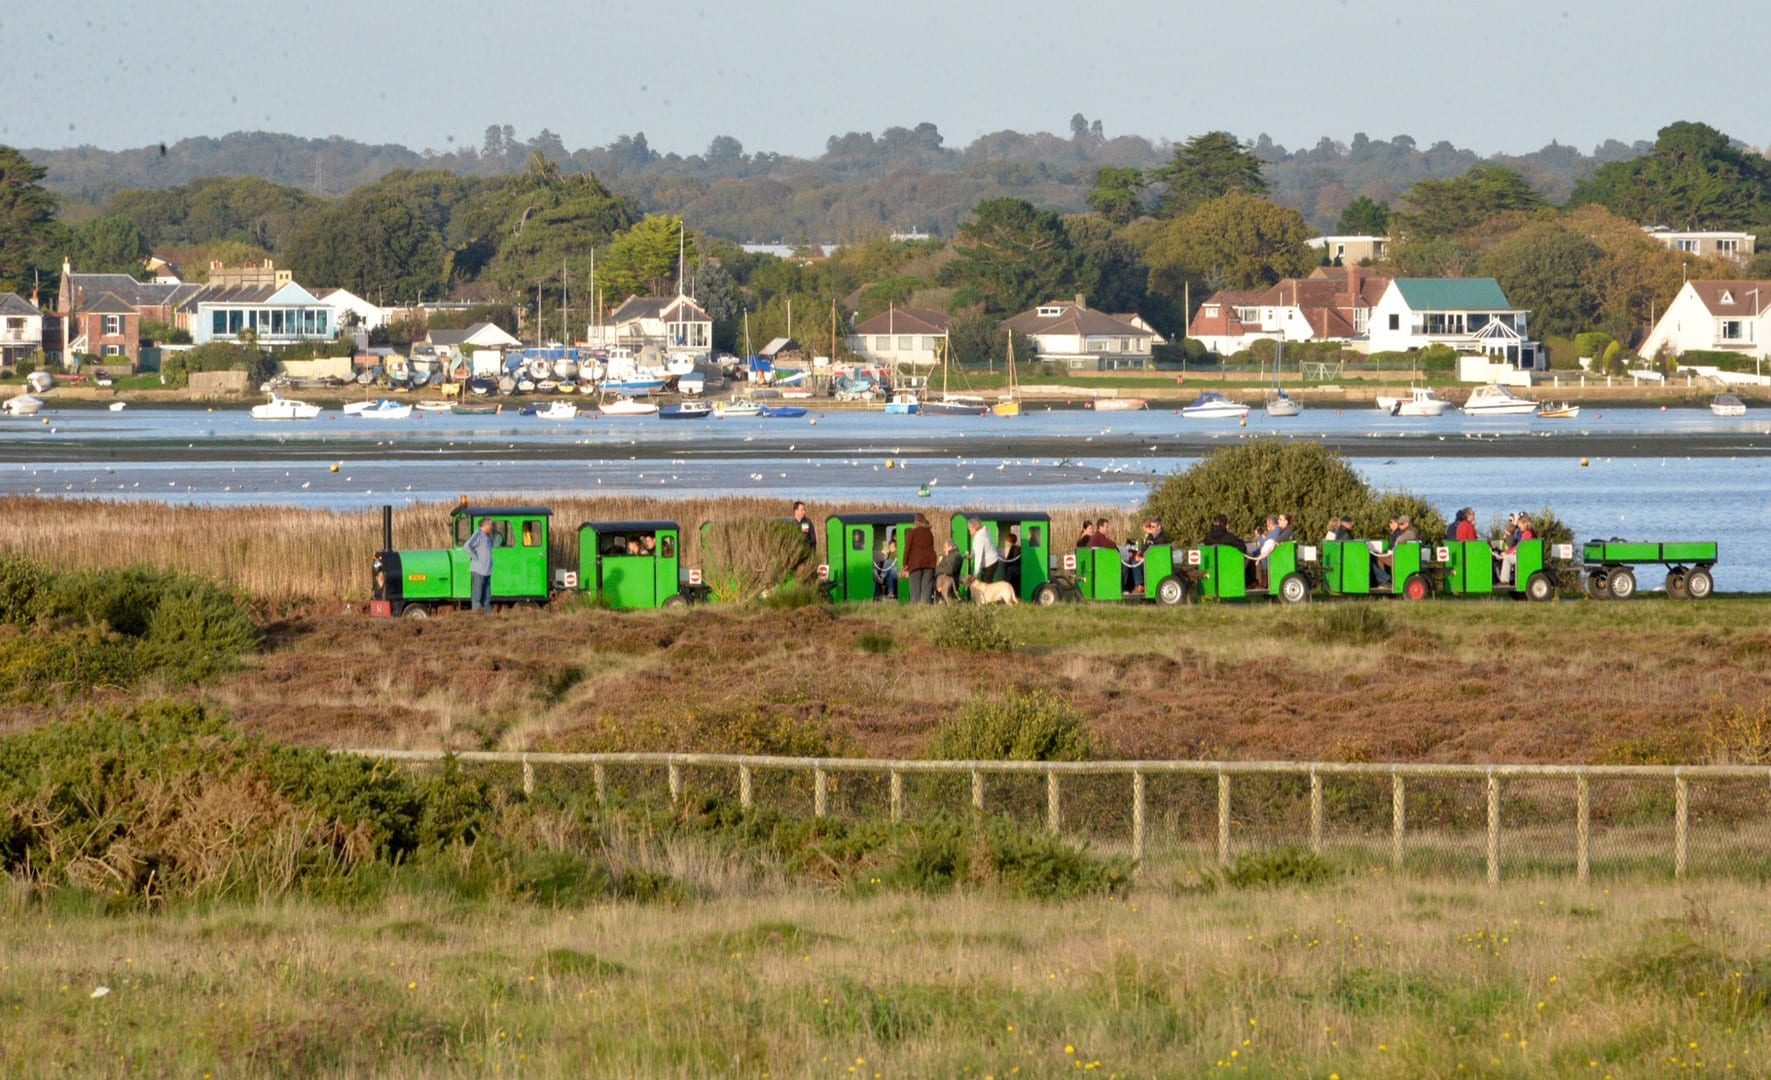 Hengistbury Head train with sailing boats and houses in the background